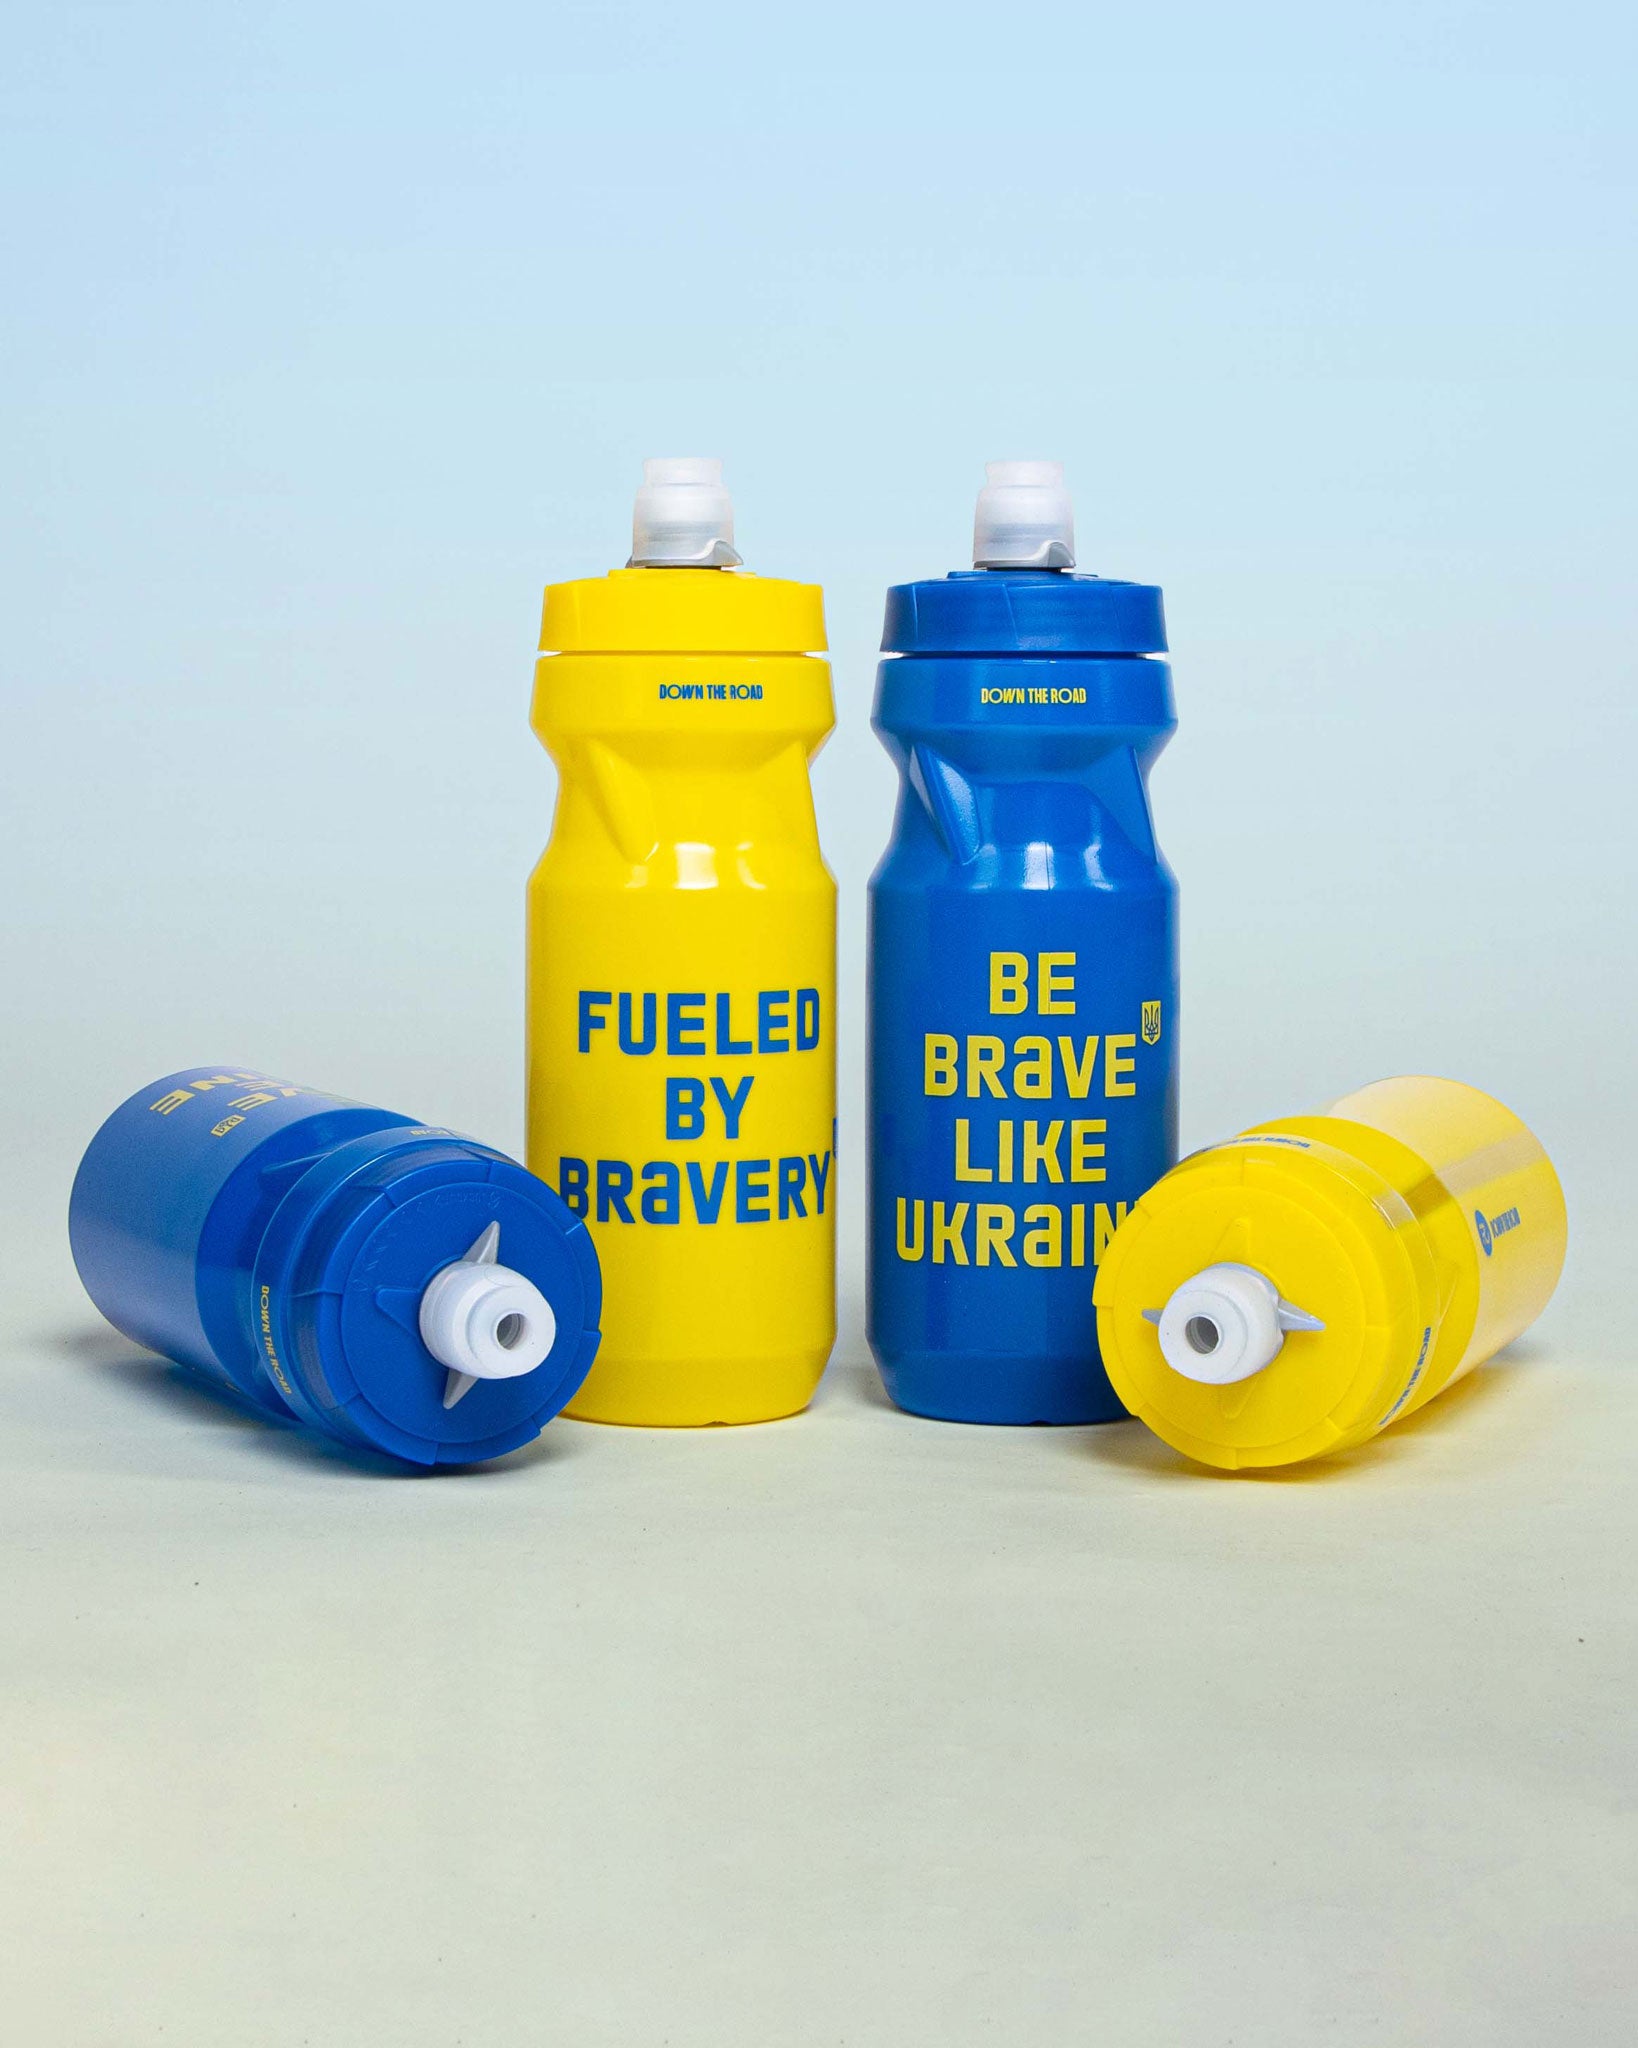 fueled by bravery and be brave like ukraine cycling bottles